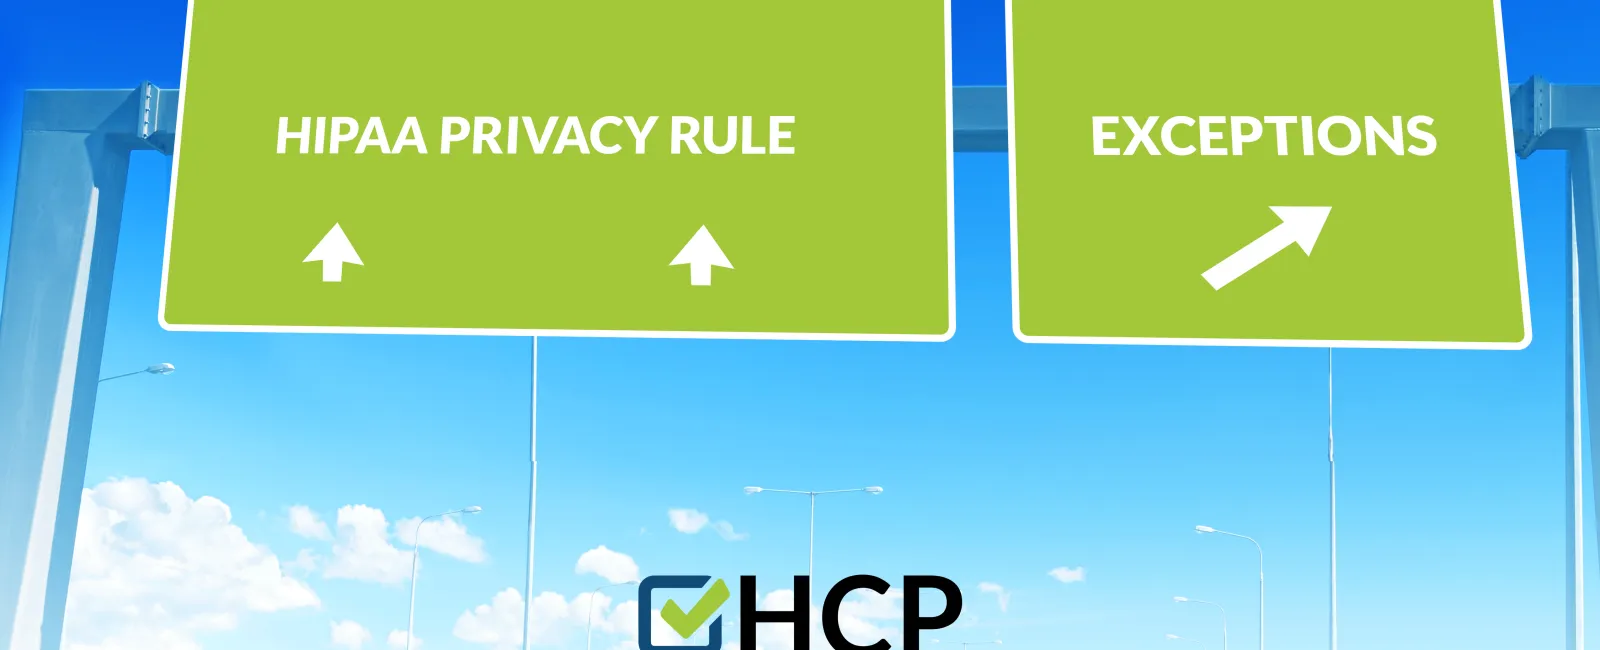 Exceptions to the HIPAA Privacy Rule